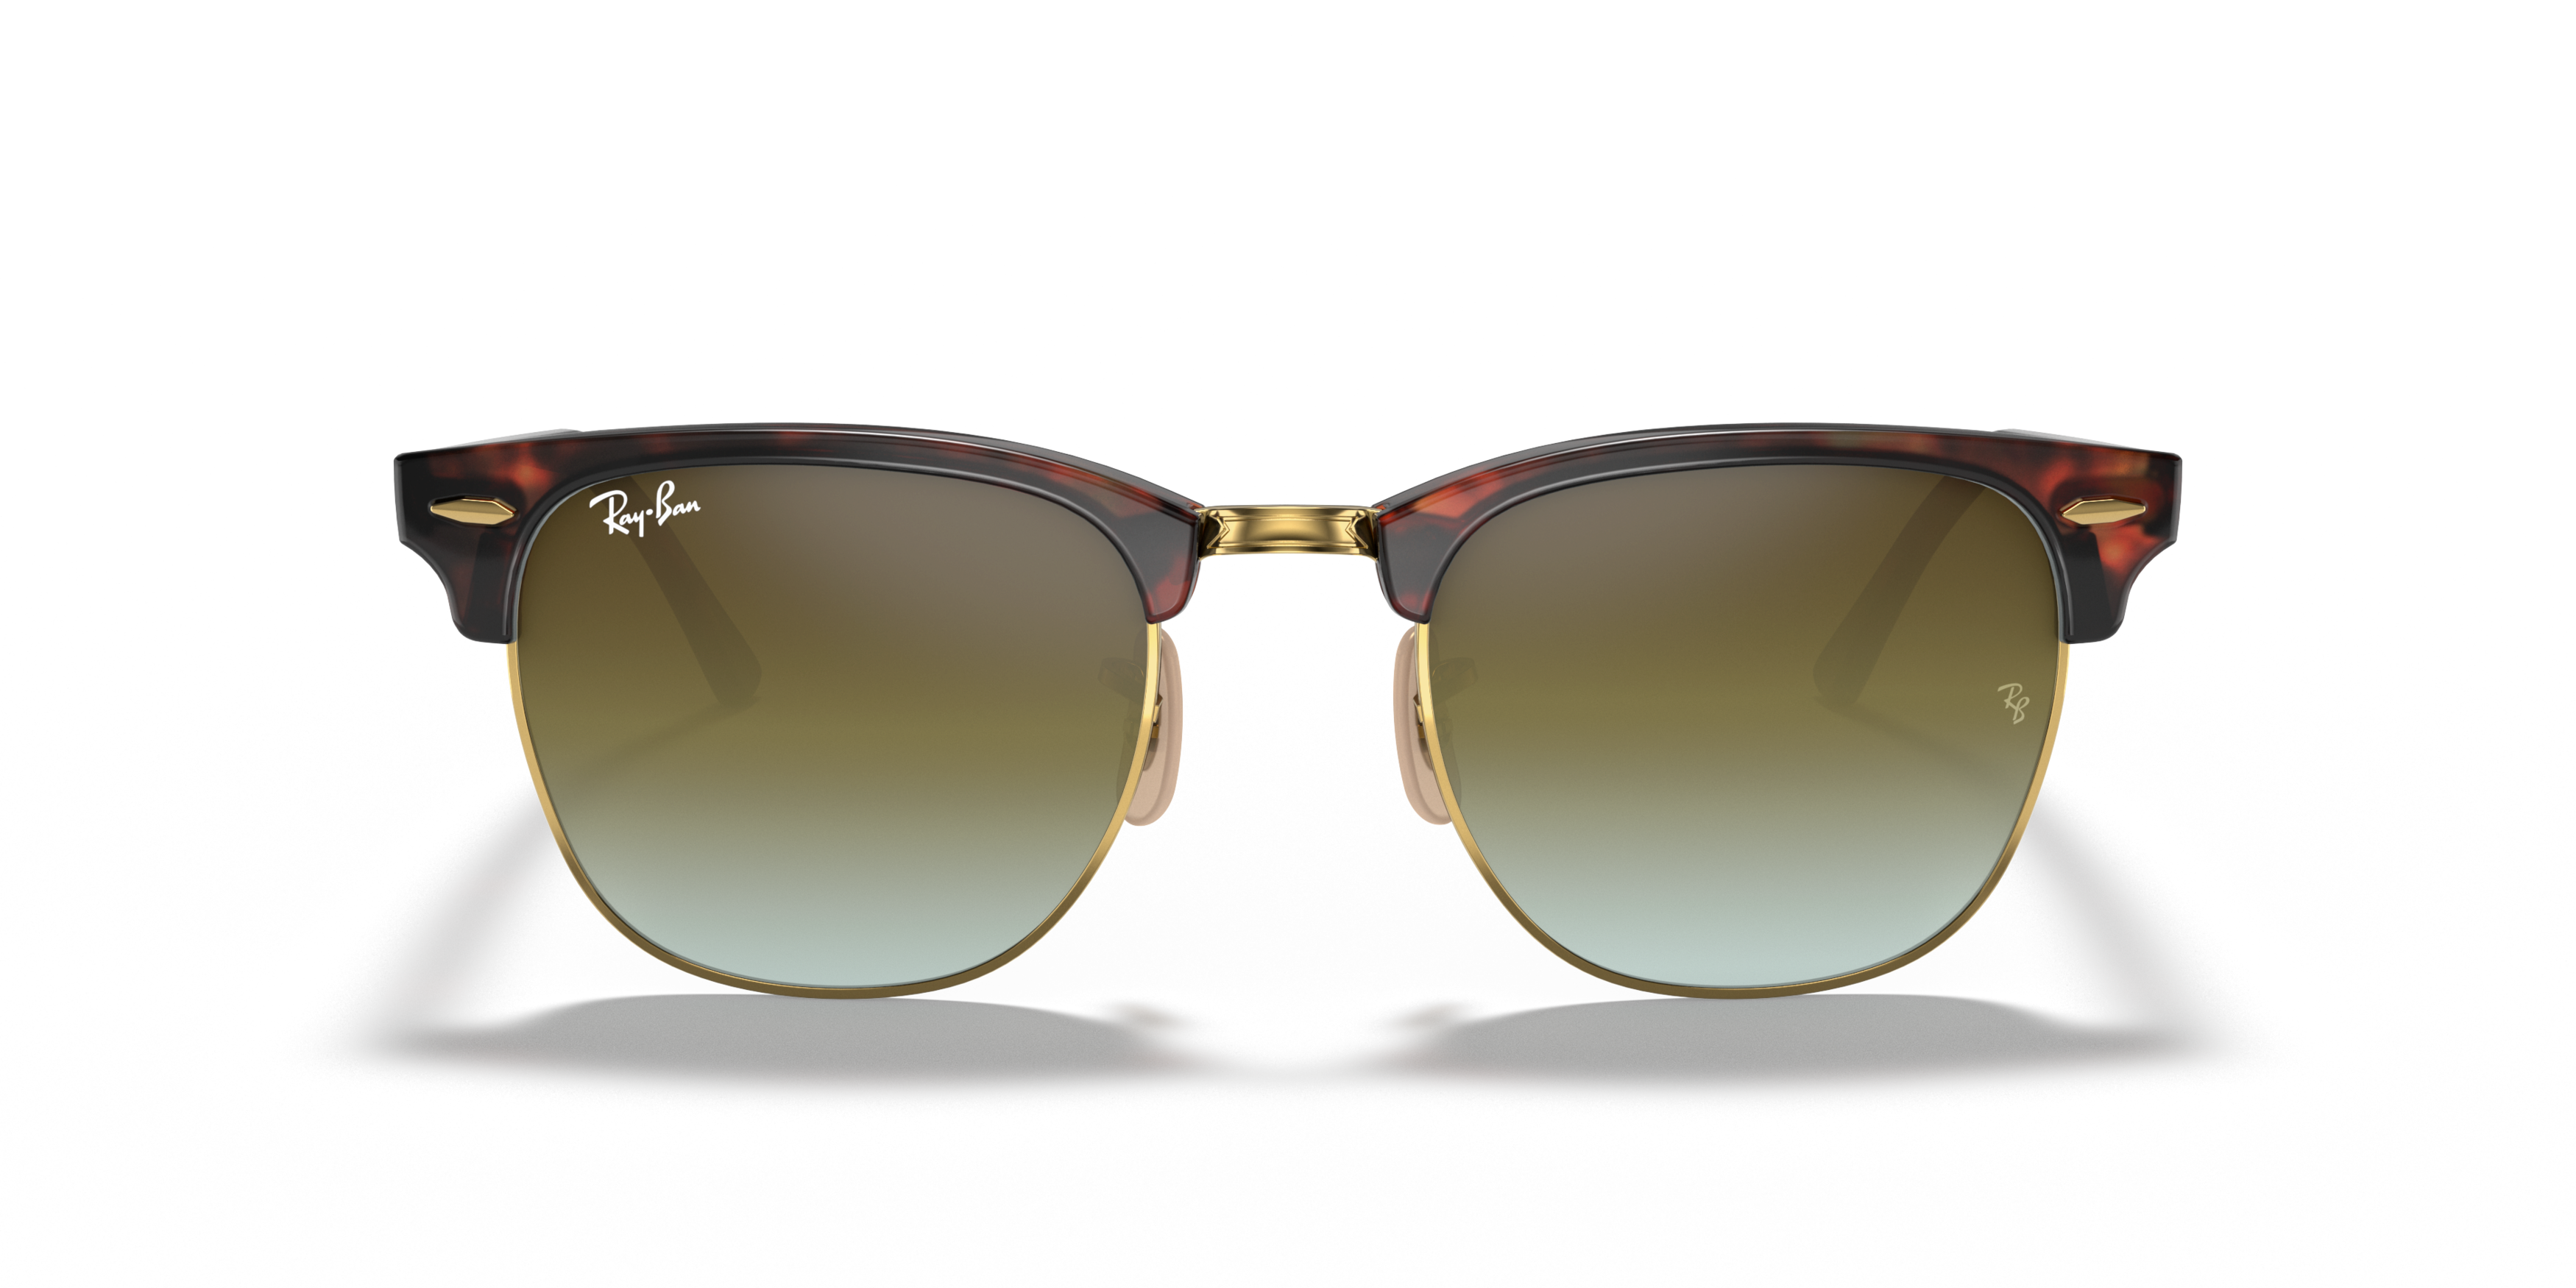 [products.image.front] Ray-Ban Clubmaster RB3016 990/9J